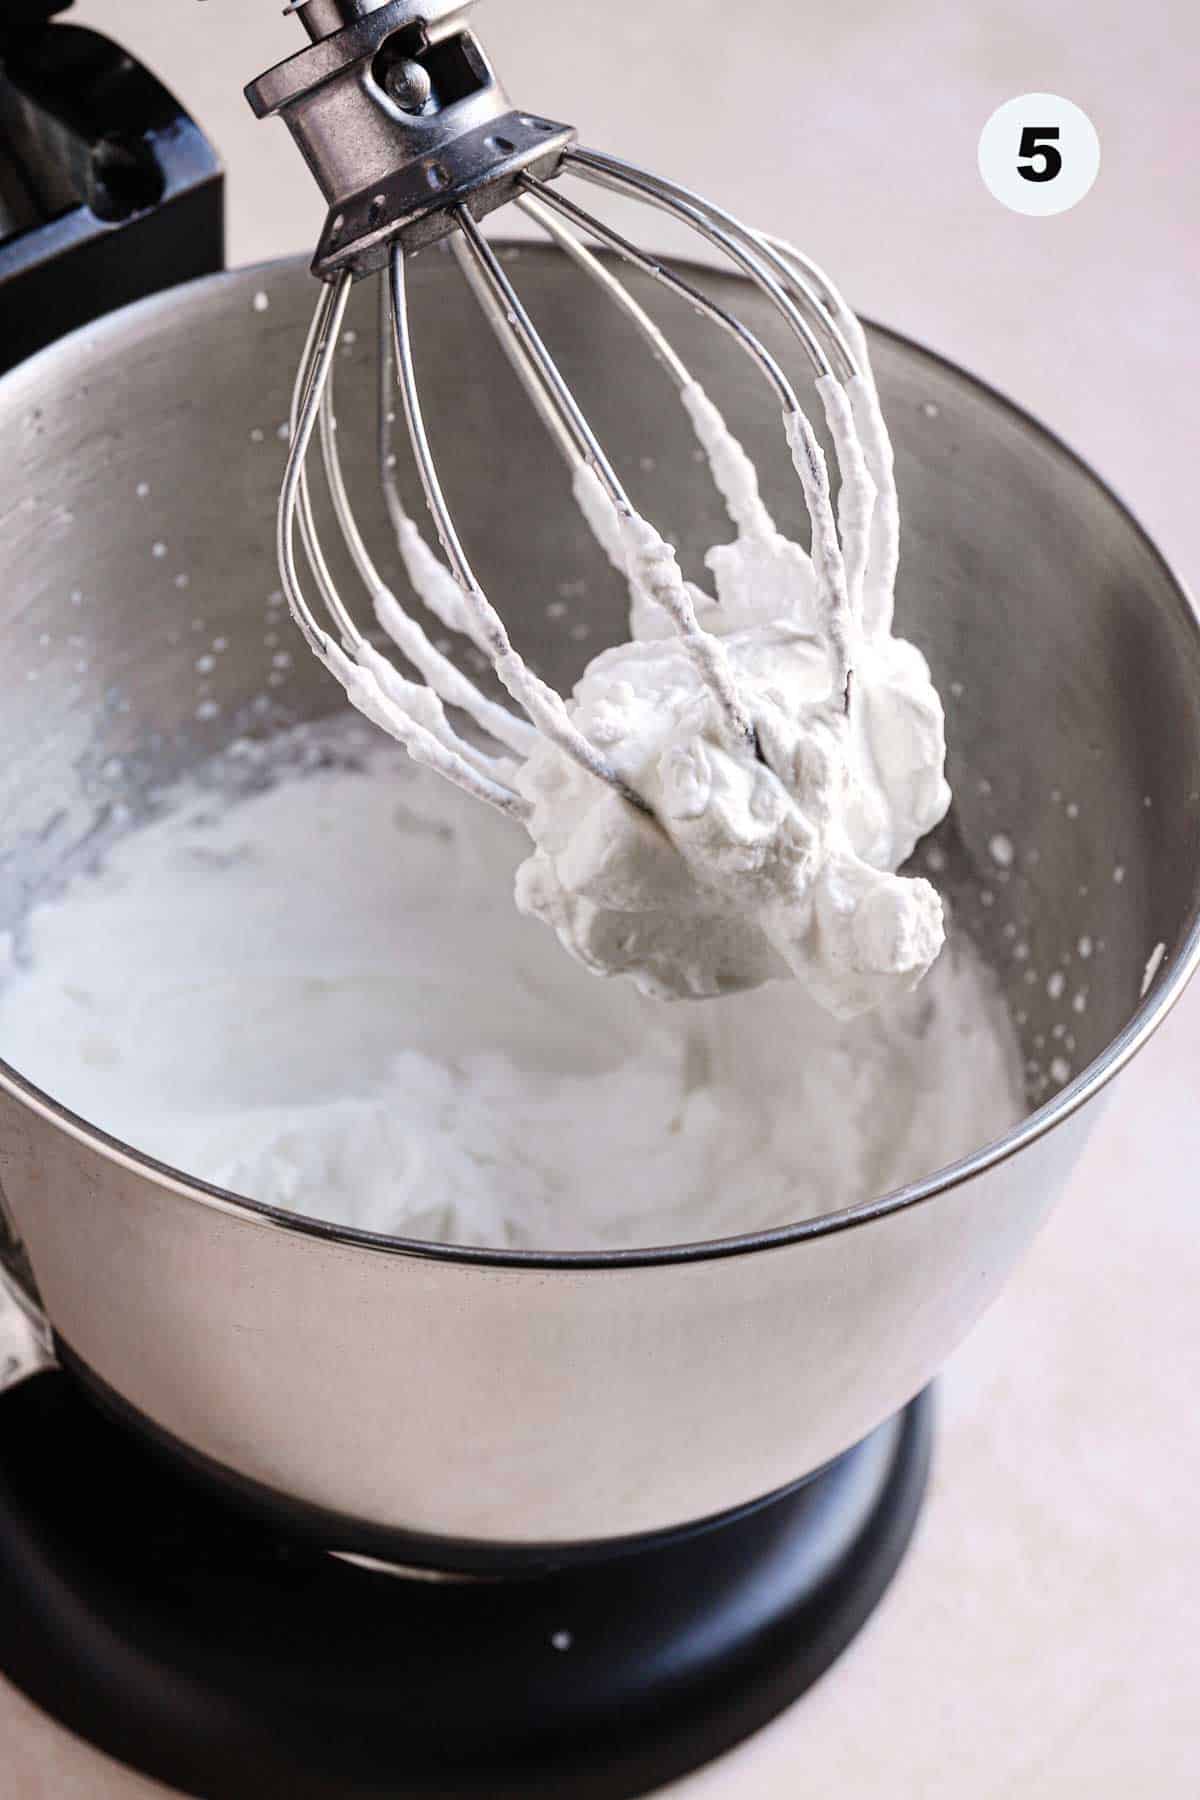 A whisk attachment full with stabilized whipped cream.